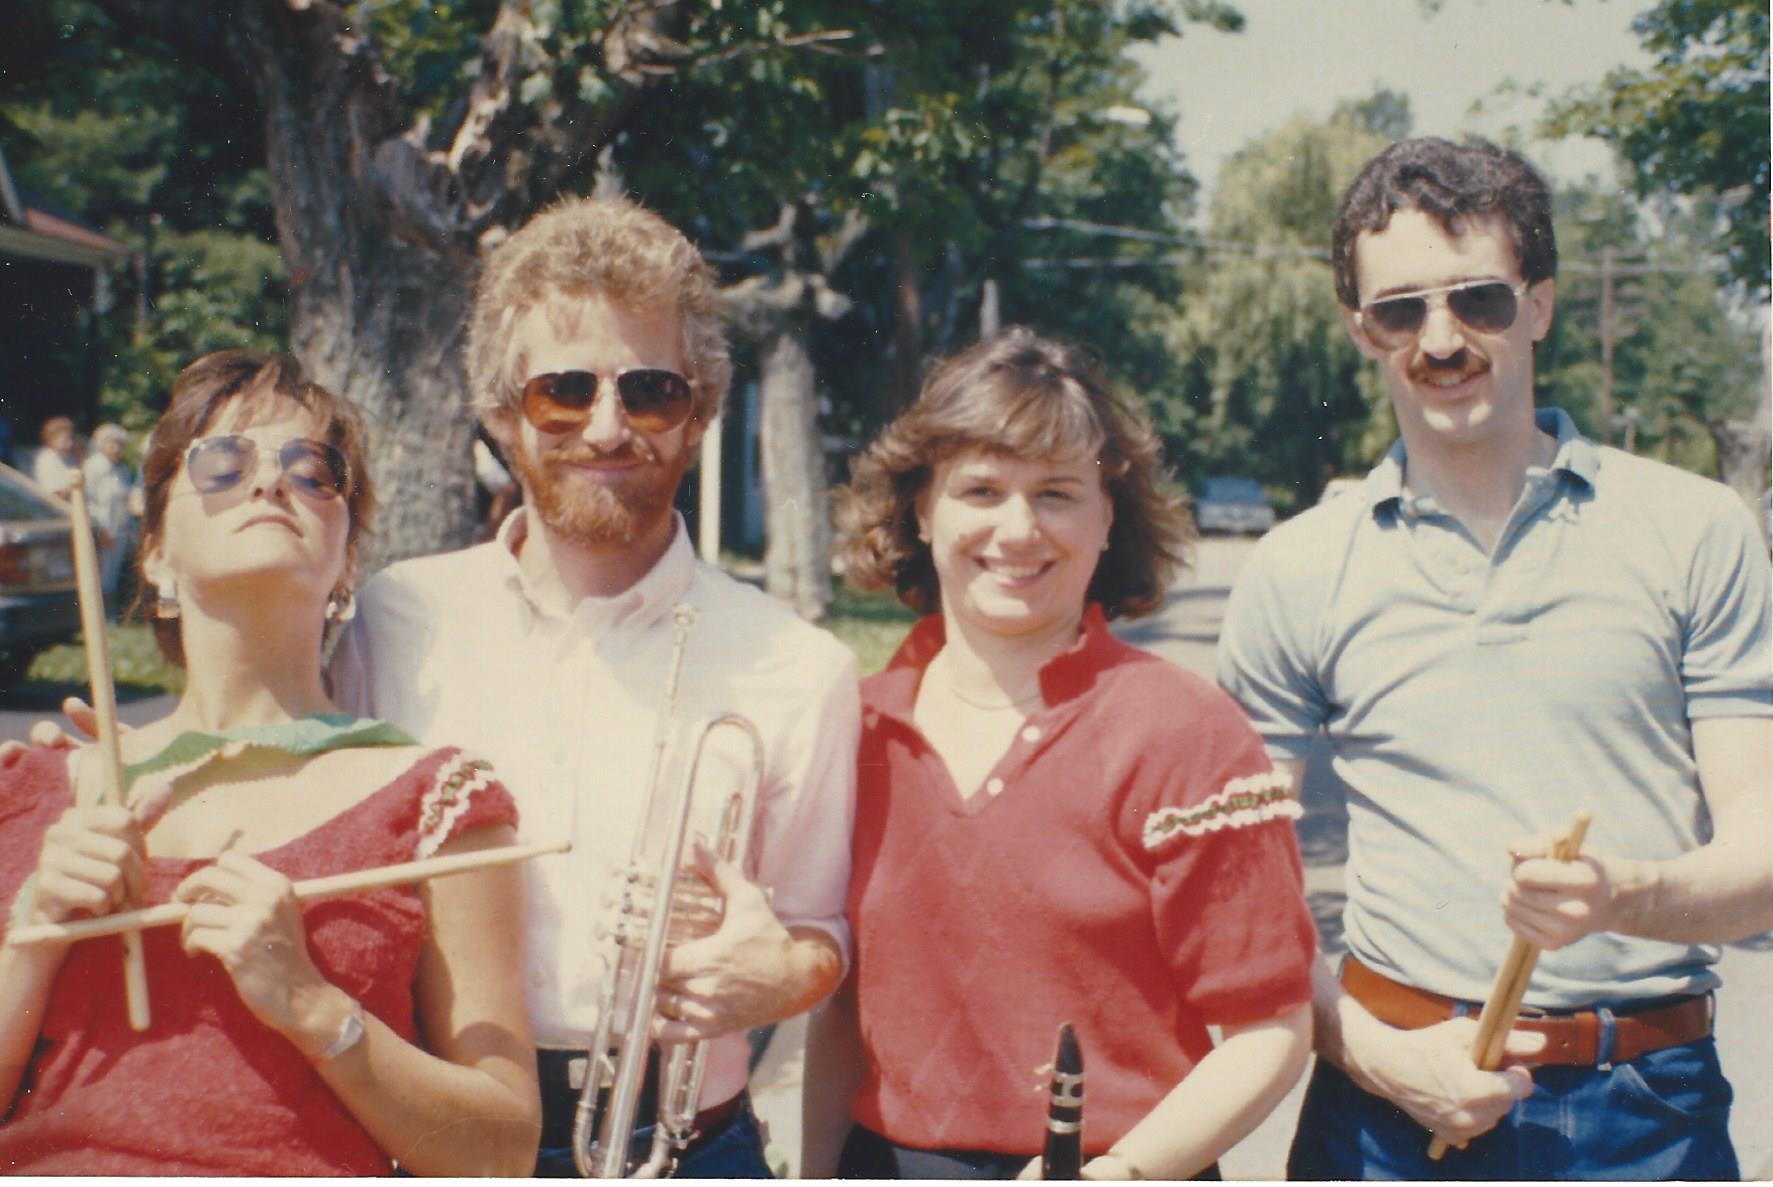  Marianne, Charlie, Cathy, and Jim playing on St. Anthony's Day in Cortland (1986) 